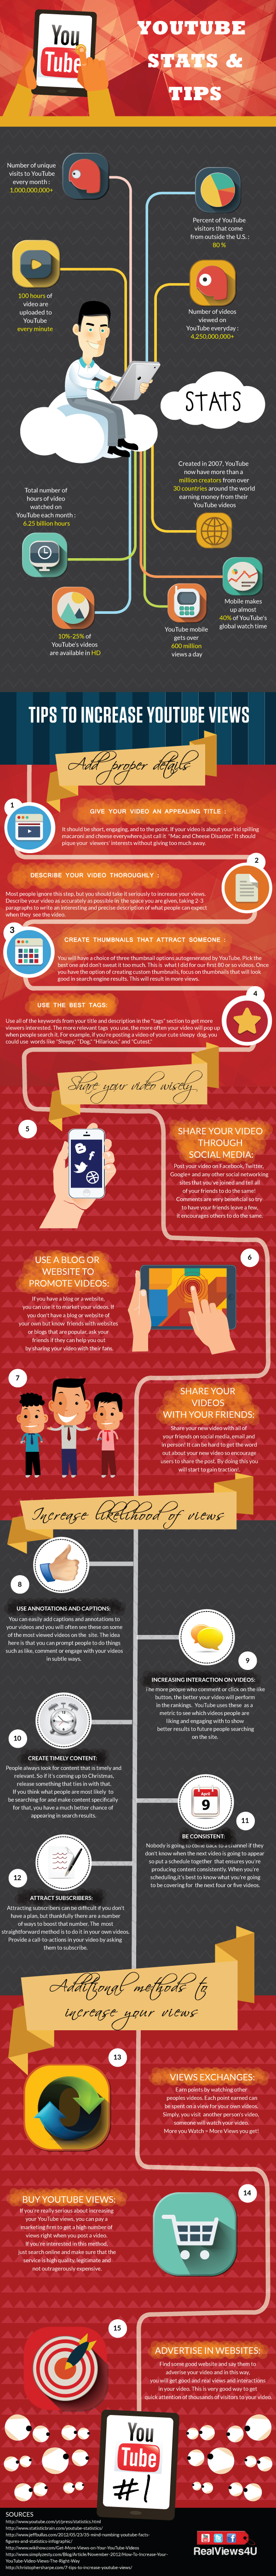 15 Ways to Get More Youtube Video Views